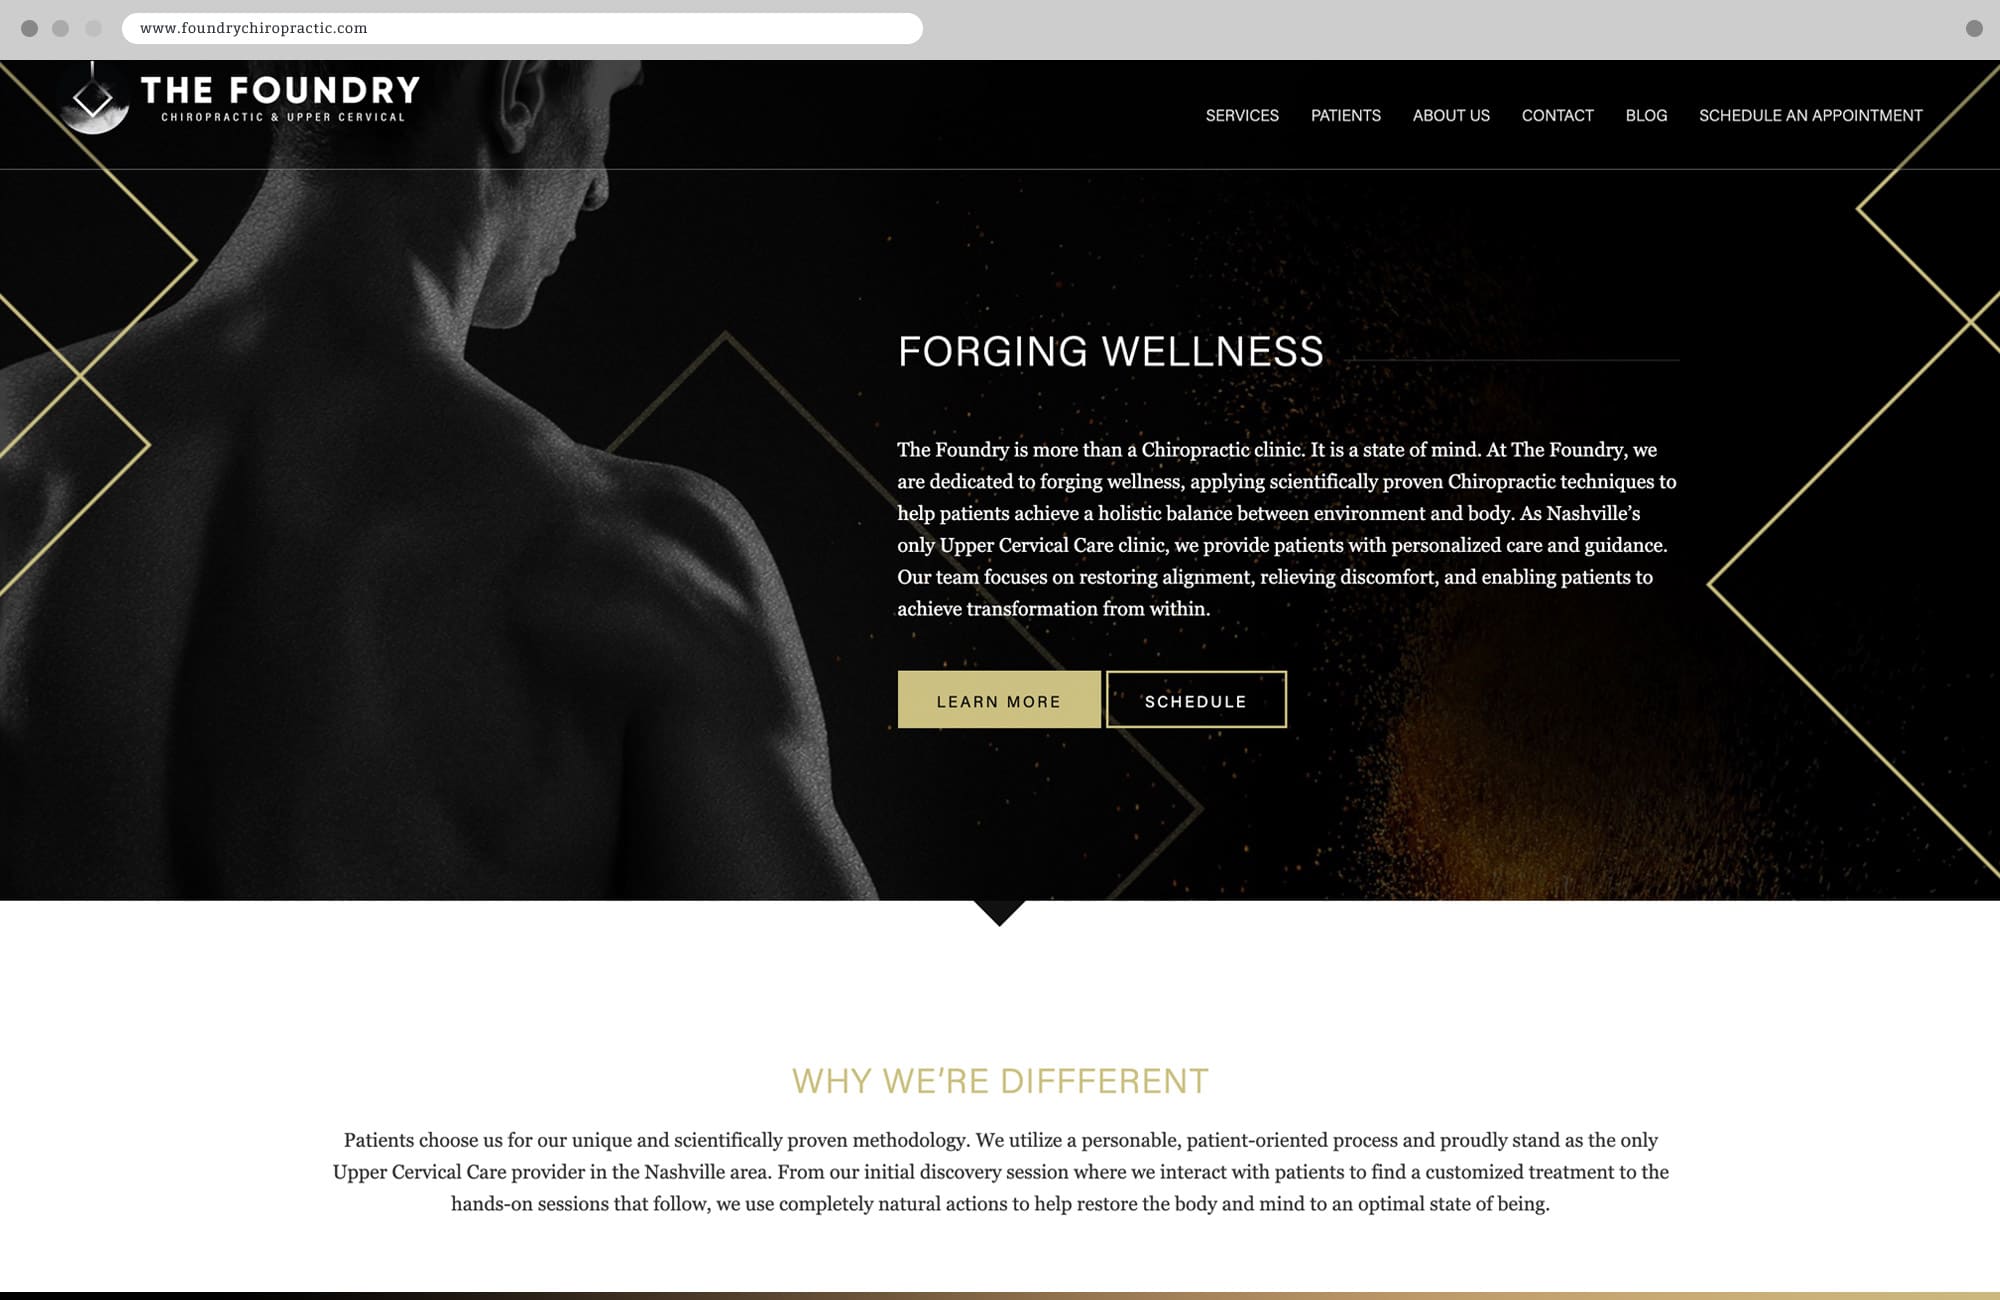 Punch -The Foundry Home Website Page Why We're Different